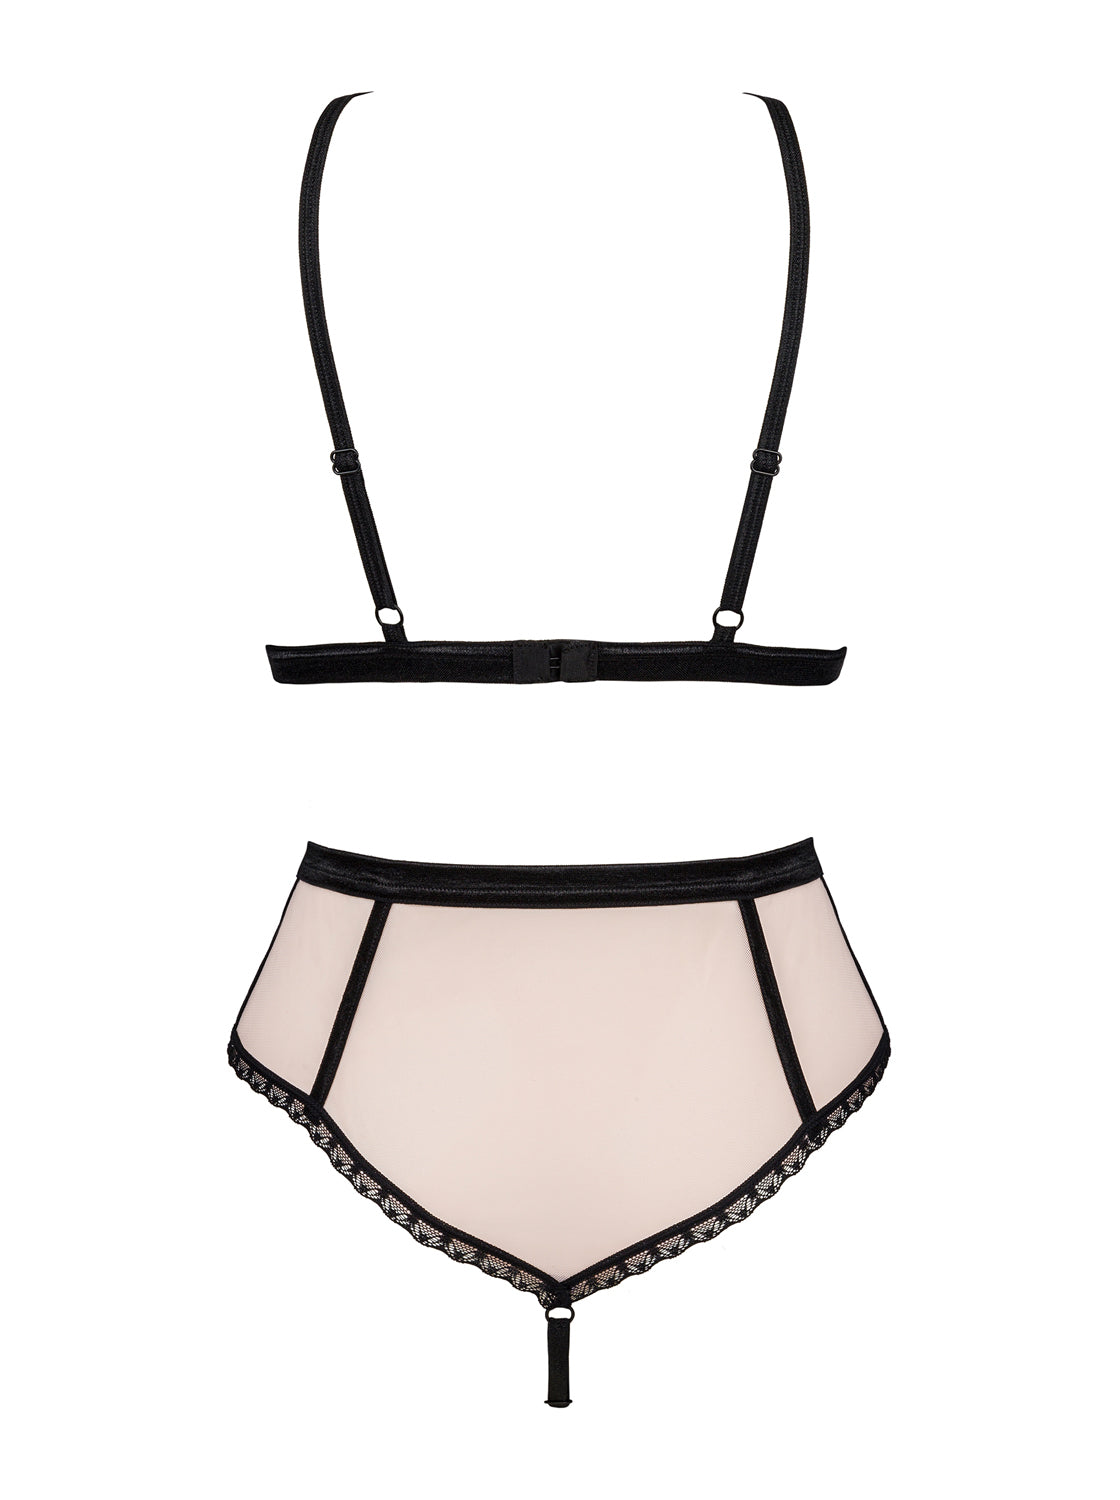 Lilines an elegant set made of elastic and delicate material in pink with black details